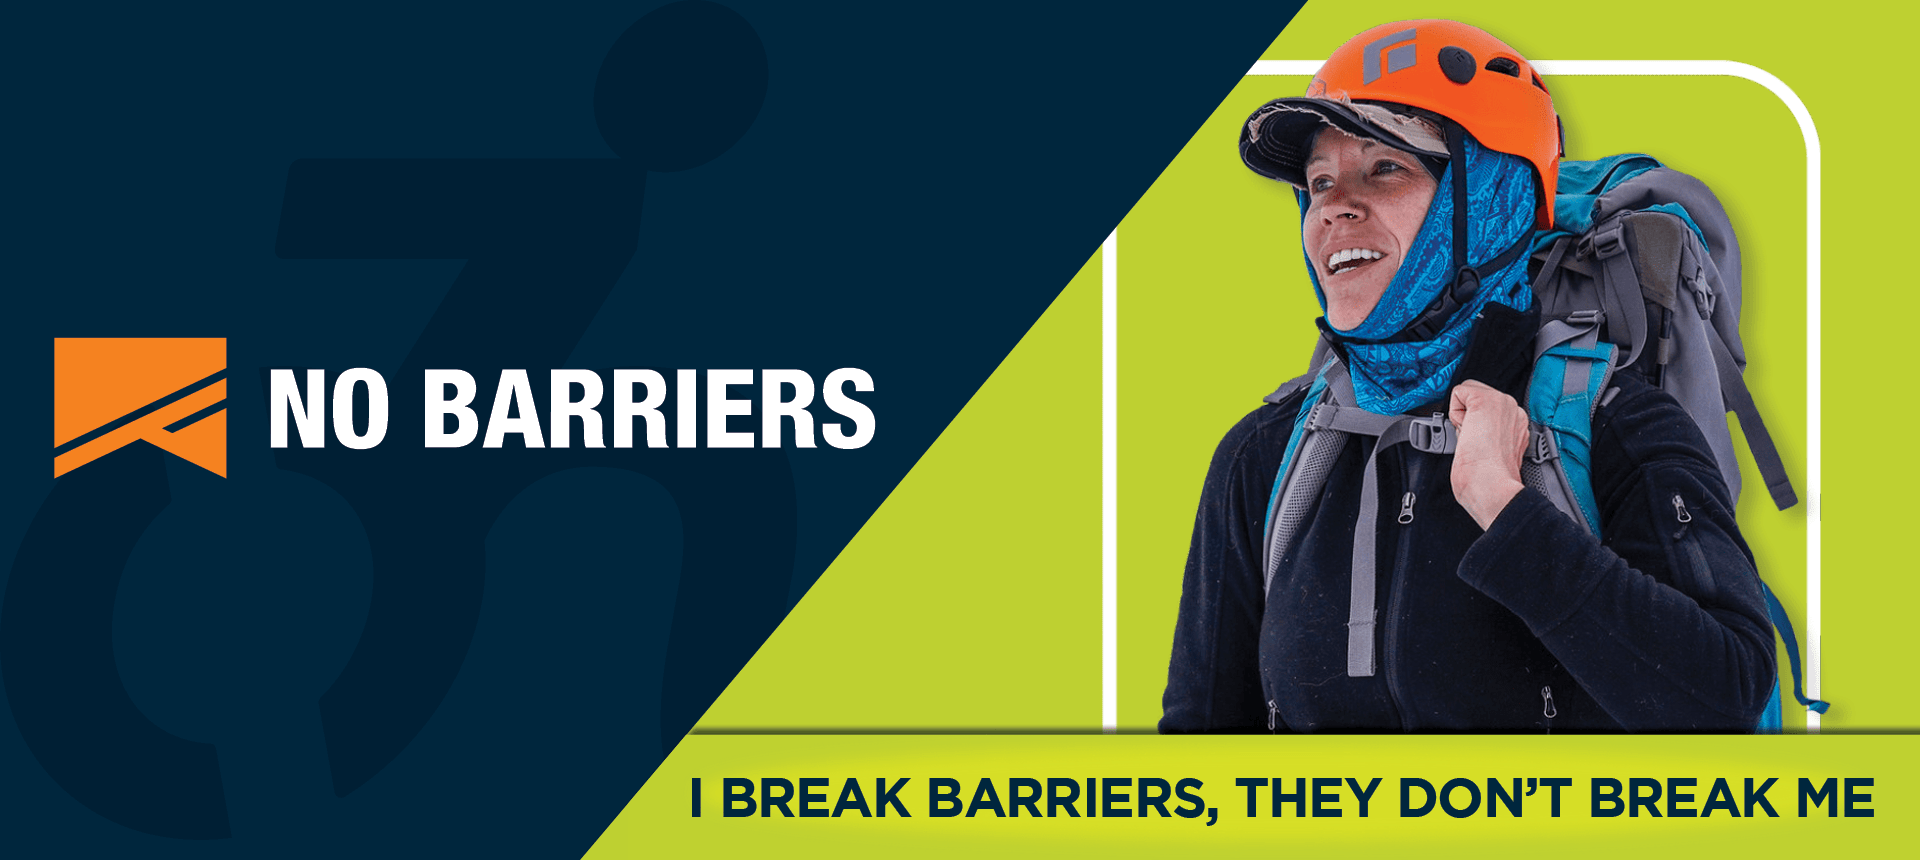 National Ramp Supported Charity - No Barriers Banner